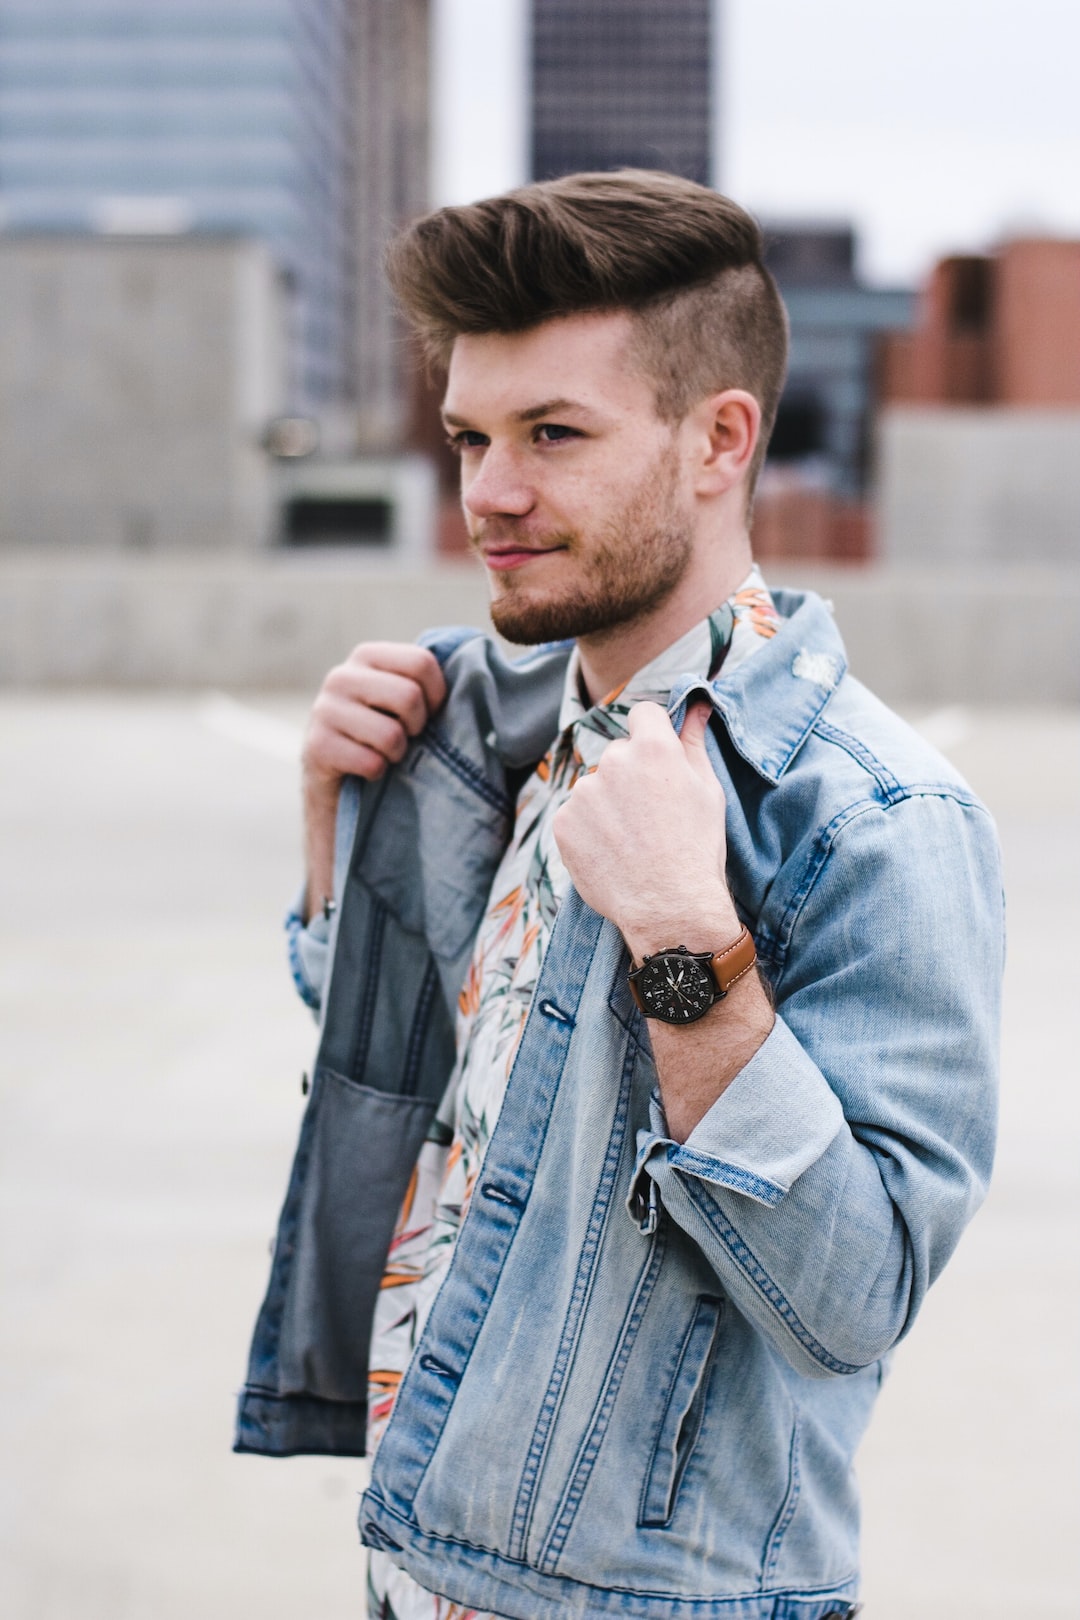 Fashion Trends for Men: What's In and What's Out